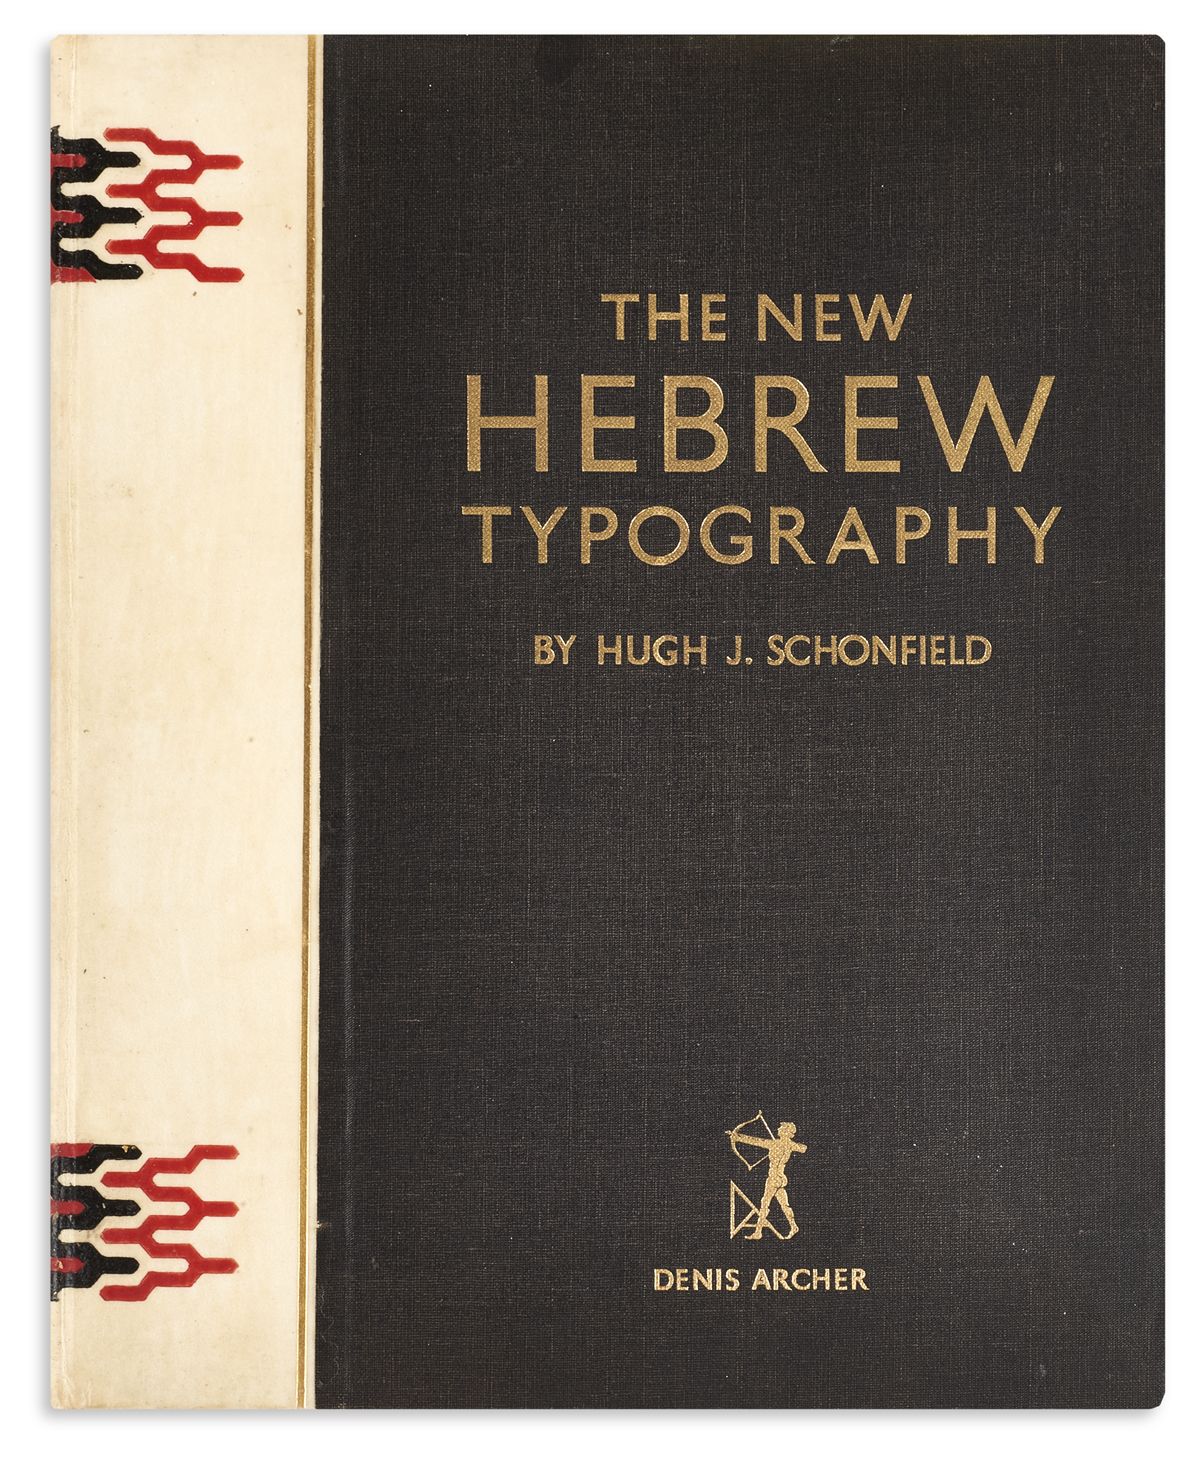 The New Hebrew Typography. With an Introduction by Stanley Morison. Types drawn by Bertram F. Stevenson.